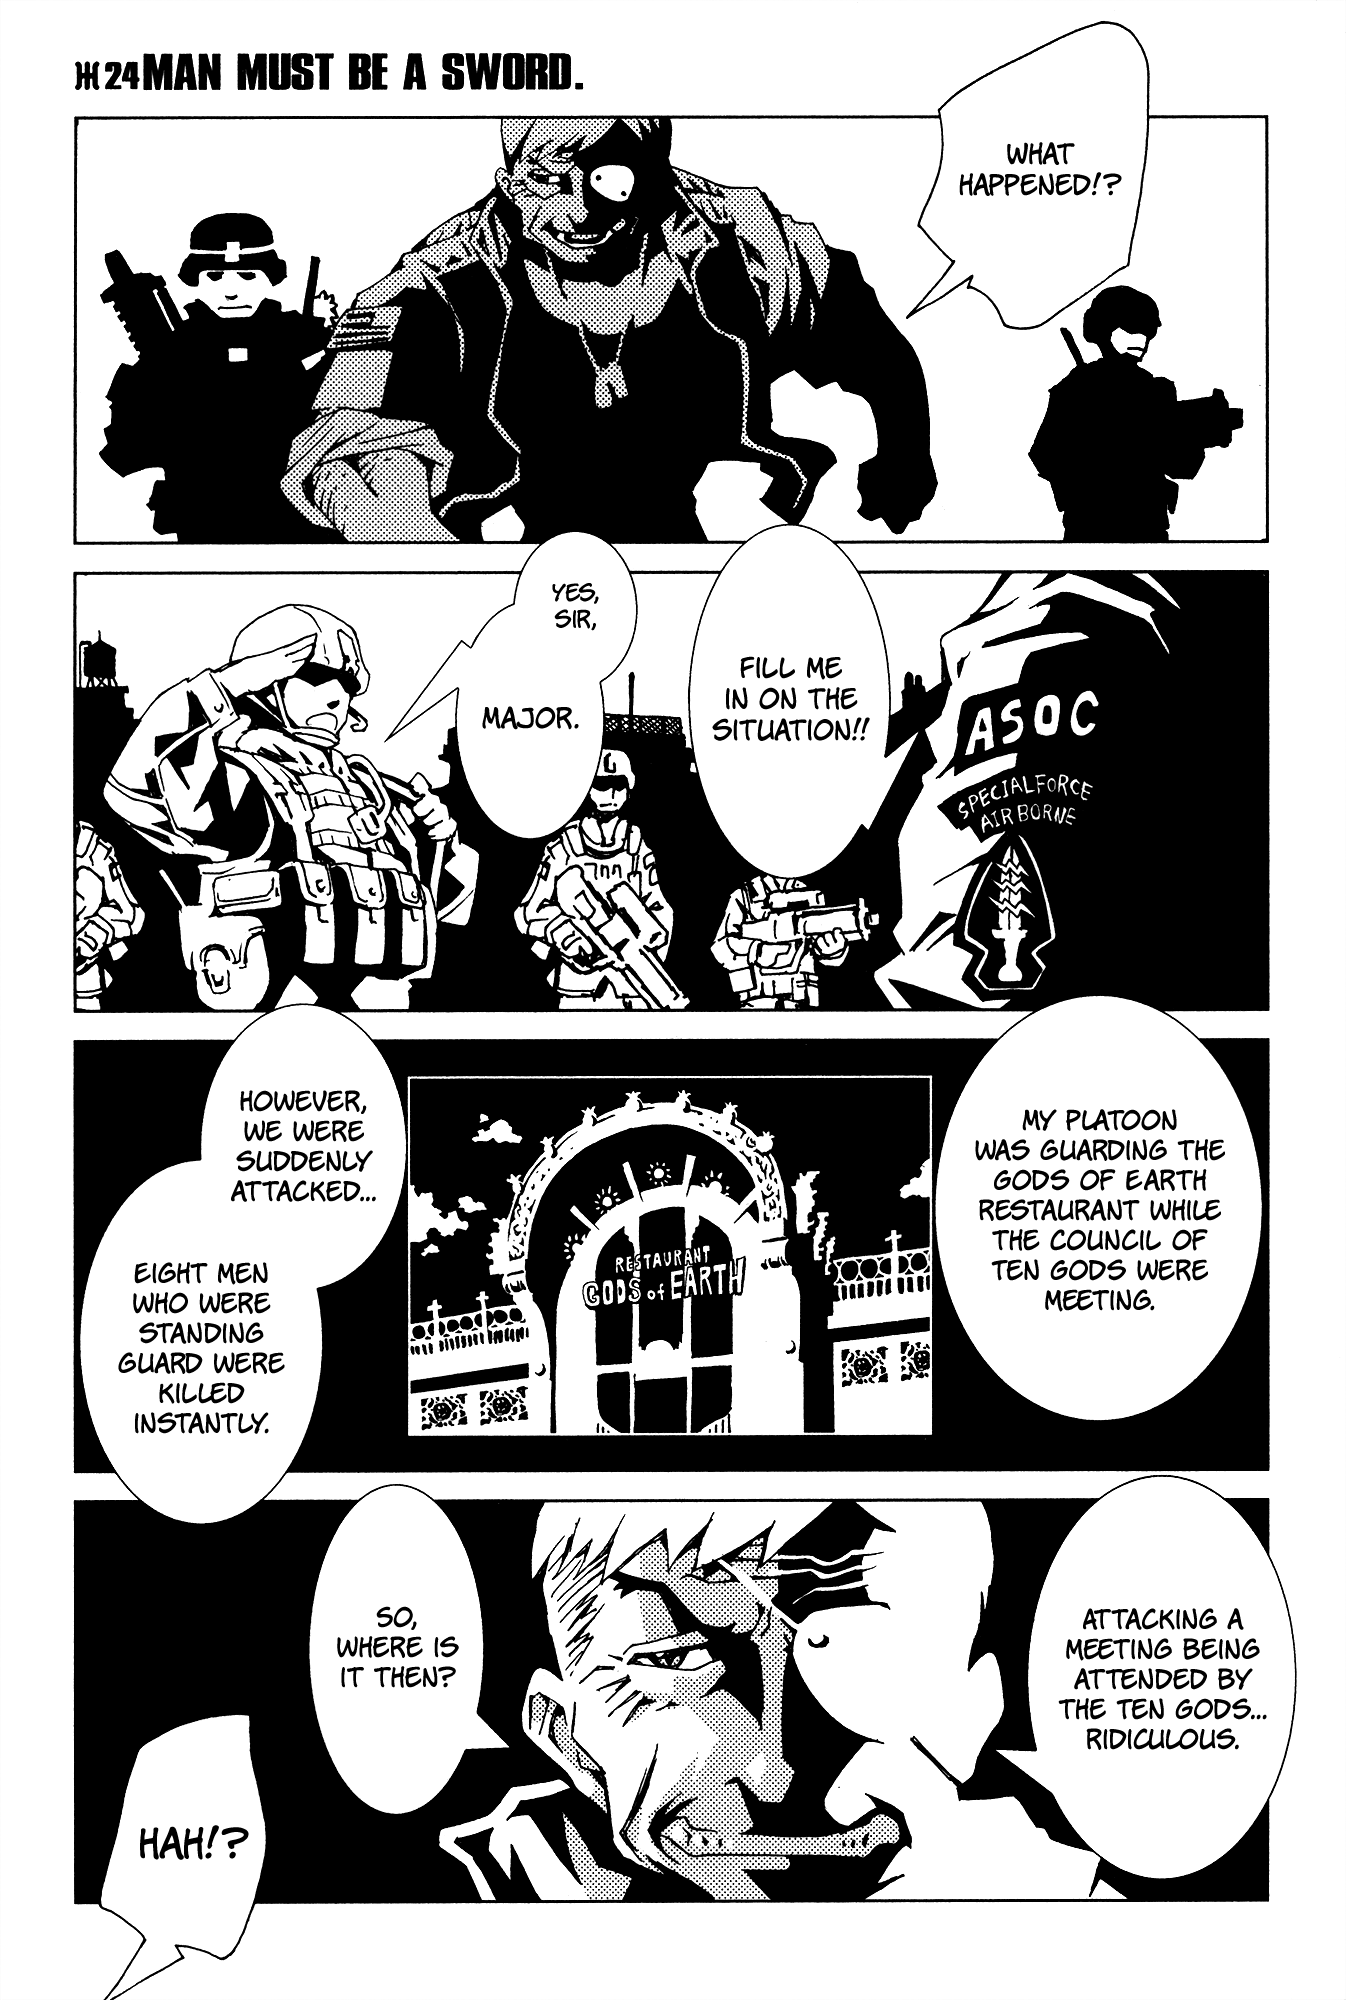 Area 51 - Page 2